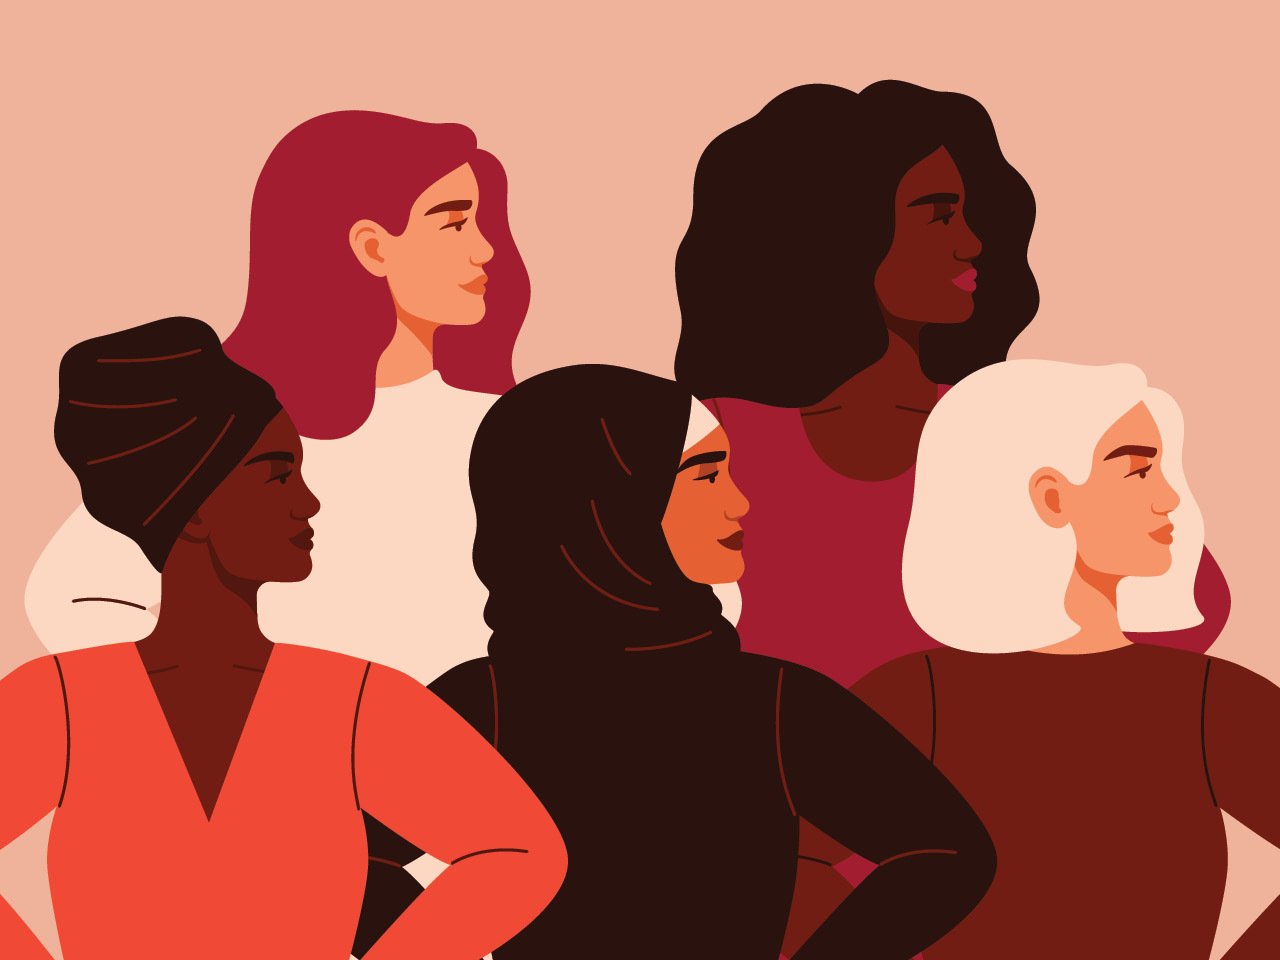 An illustration of a group of women from various racial backgrounds, all facing the same director